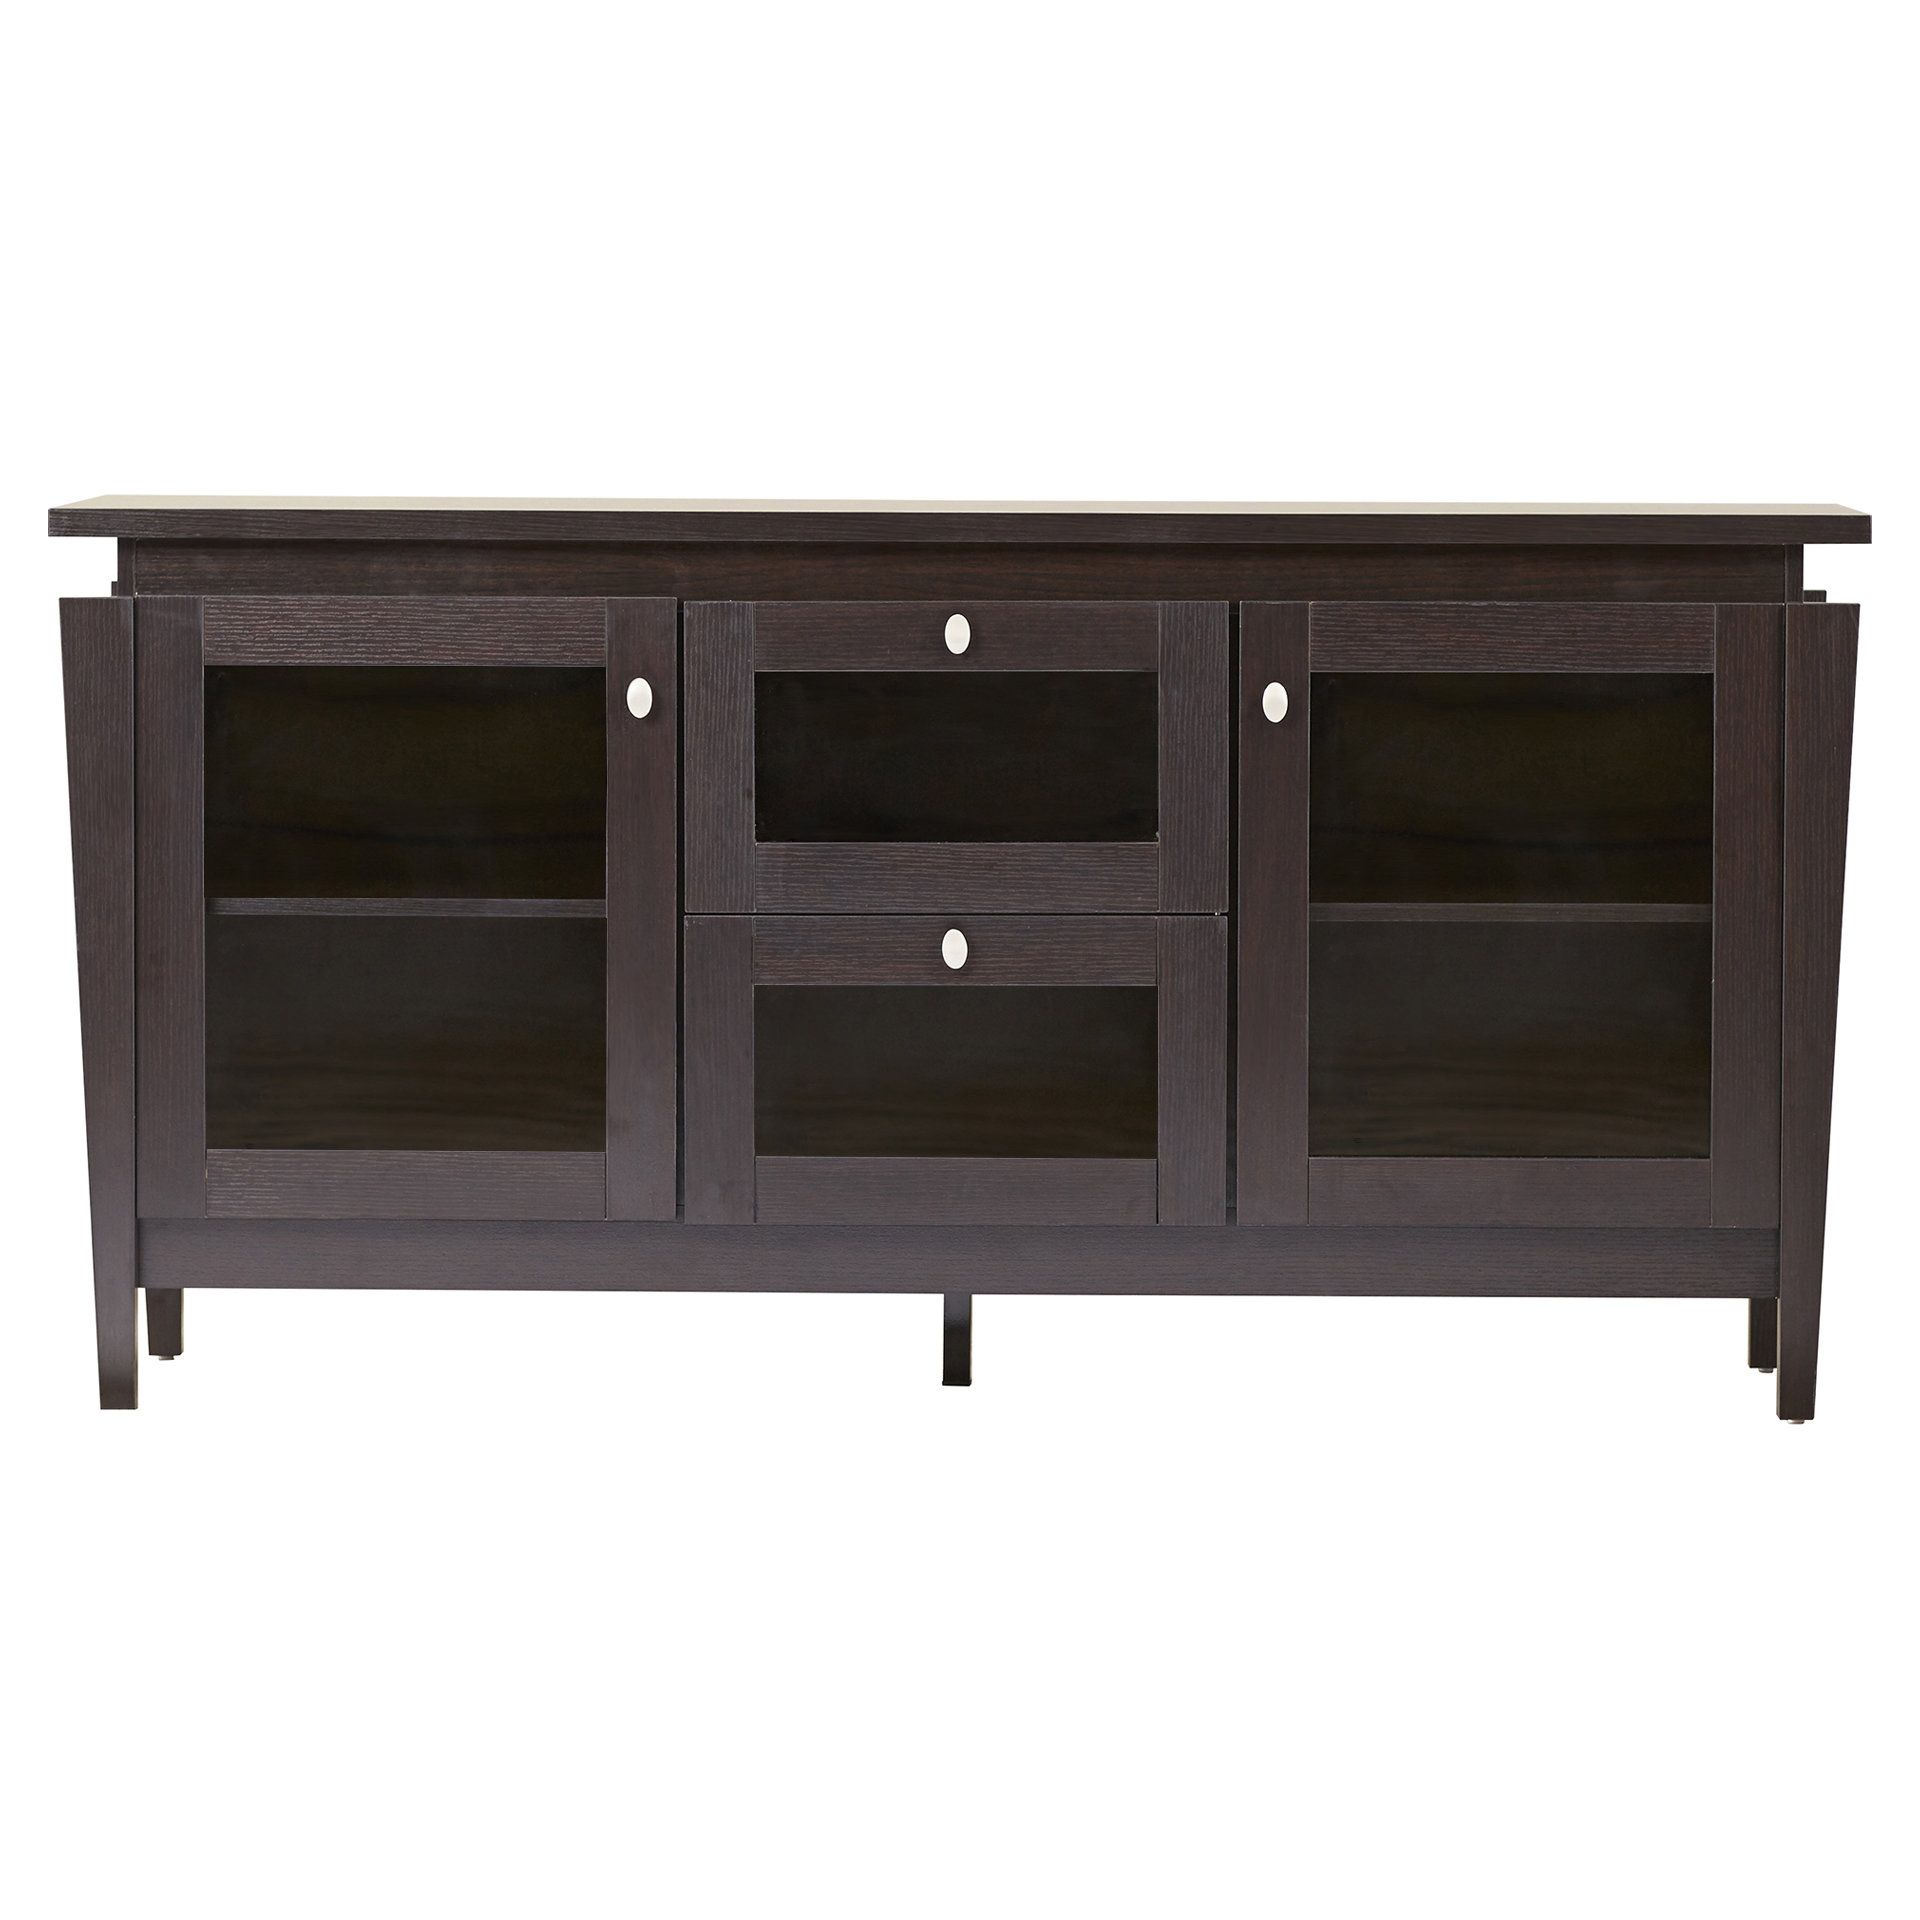 Most Popular Tate Sideboards Throughout Tate Sideboard (View 7 of 20)